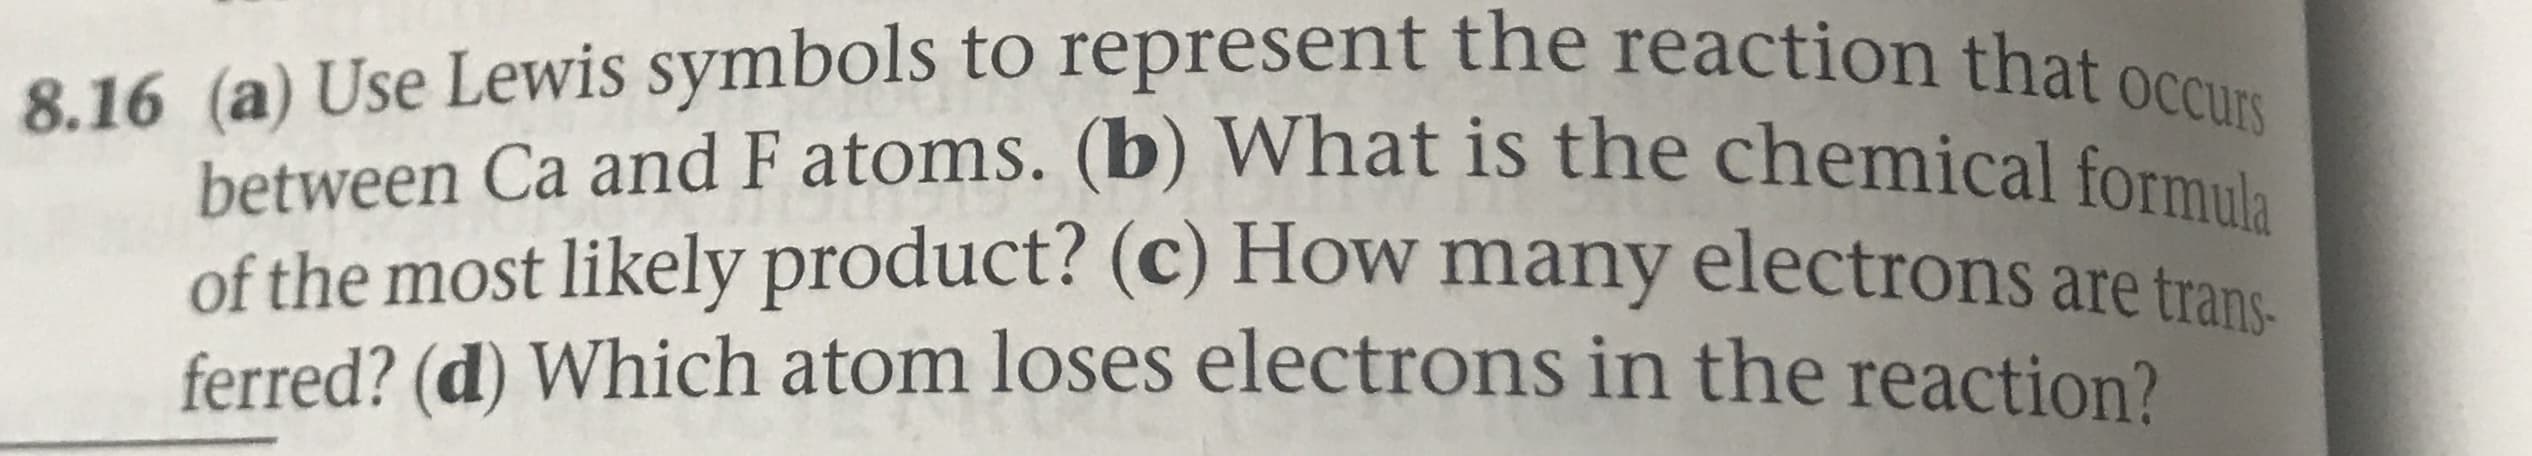 8.16 (a) Use Lewis symbols to represent the reaction that occurs
between Ca and F atoms. (b) What is the chemical formula
of the most likely product? (c) How many electrons are trans
ferred? (d) Which atom loses electrons in the reaction?
